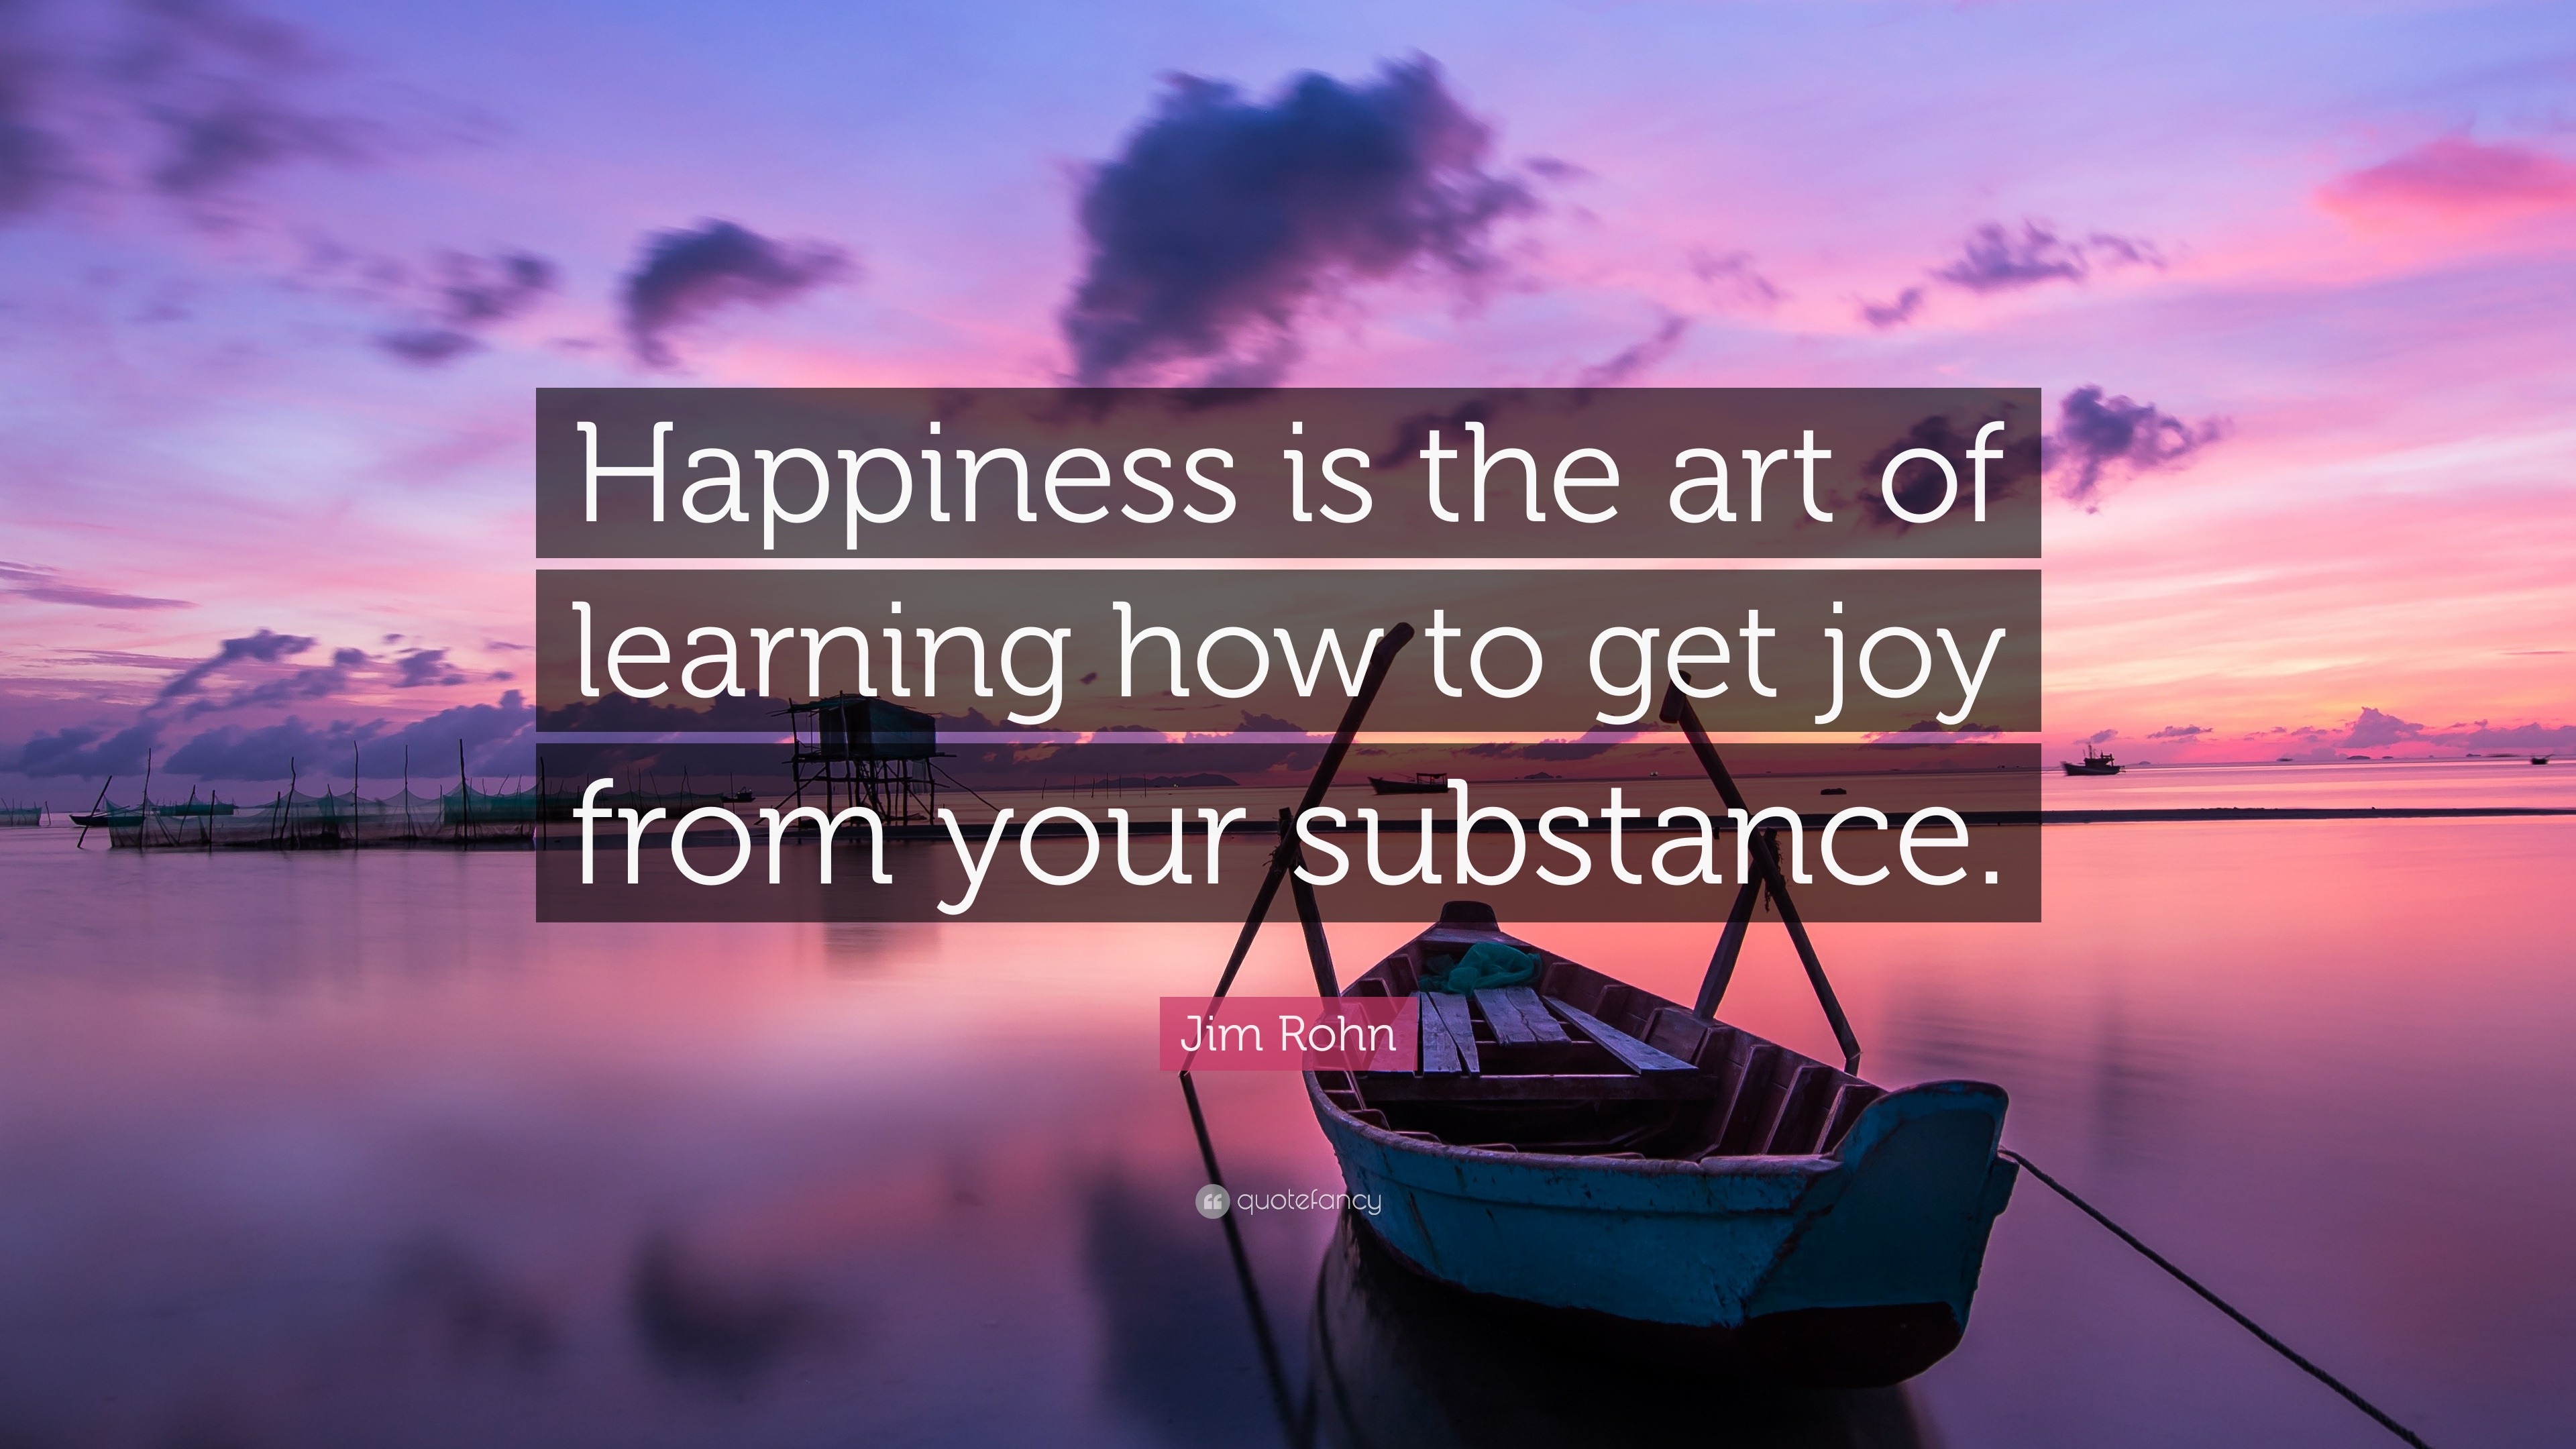 Jim Rohn quote: Happiness is the art of learning how to get joy